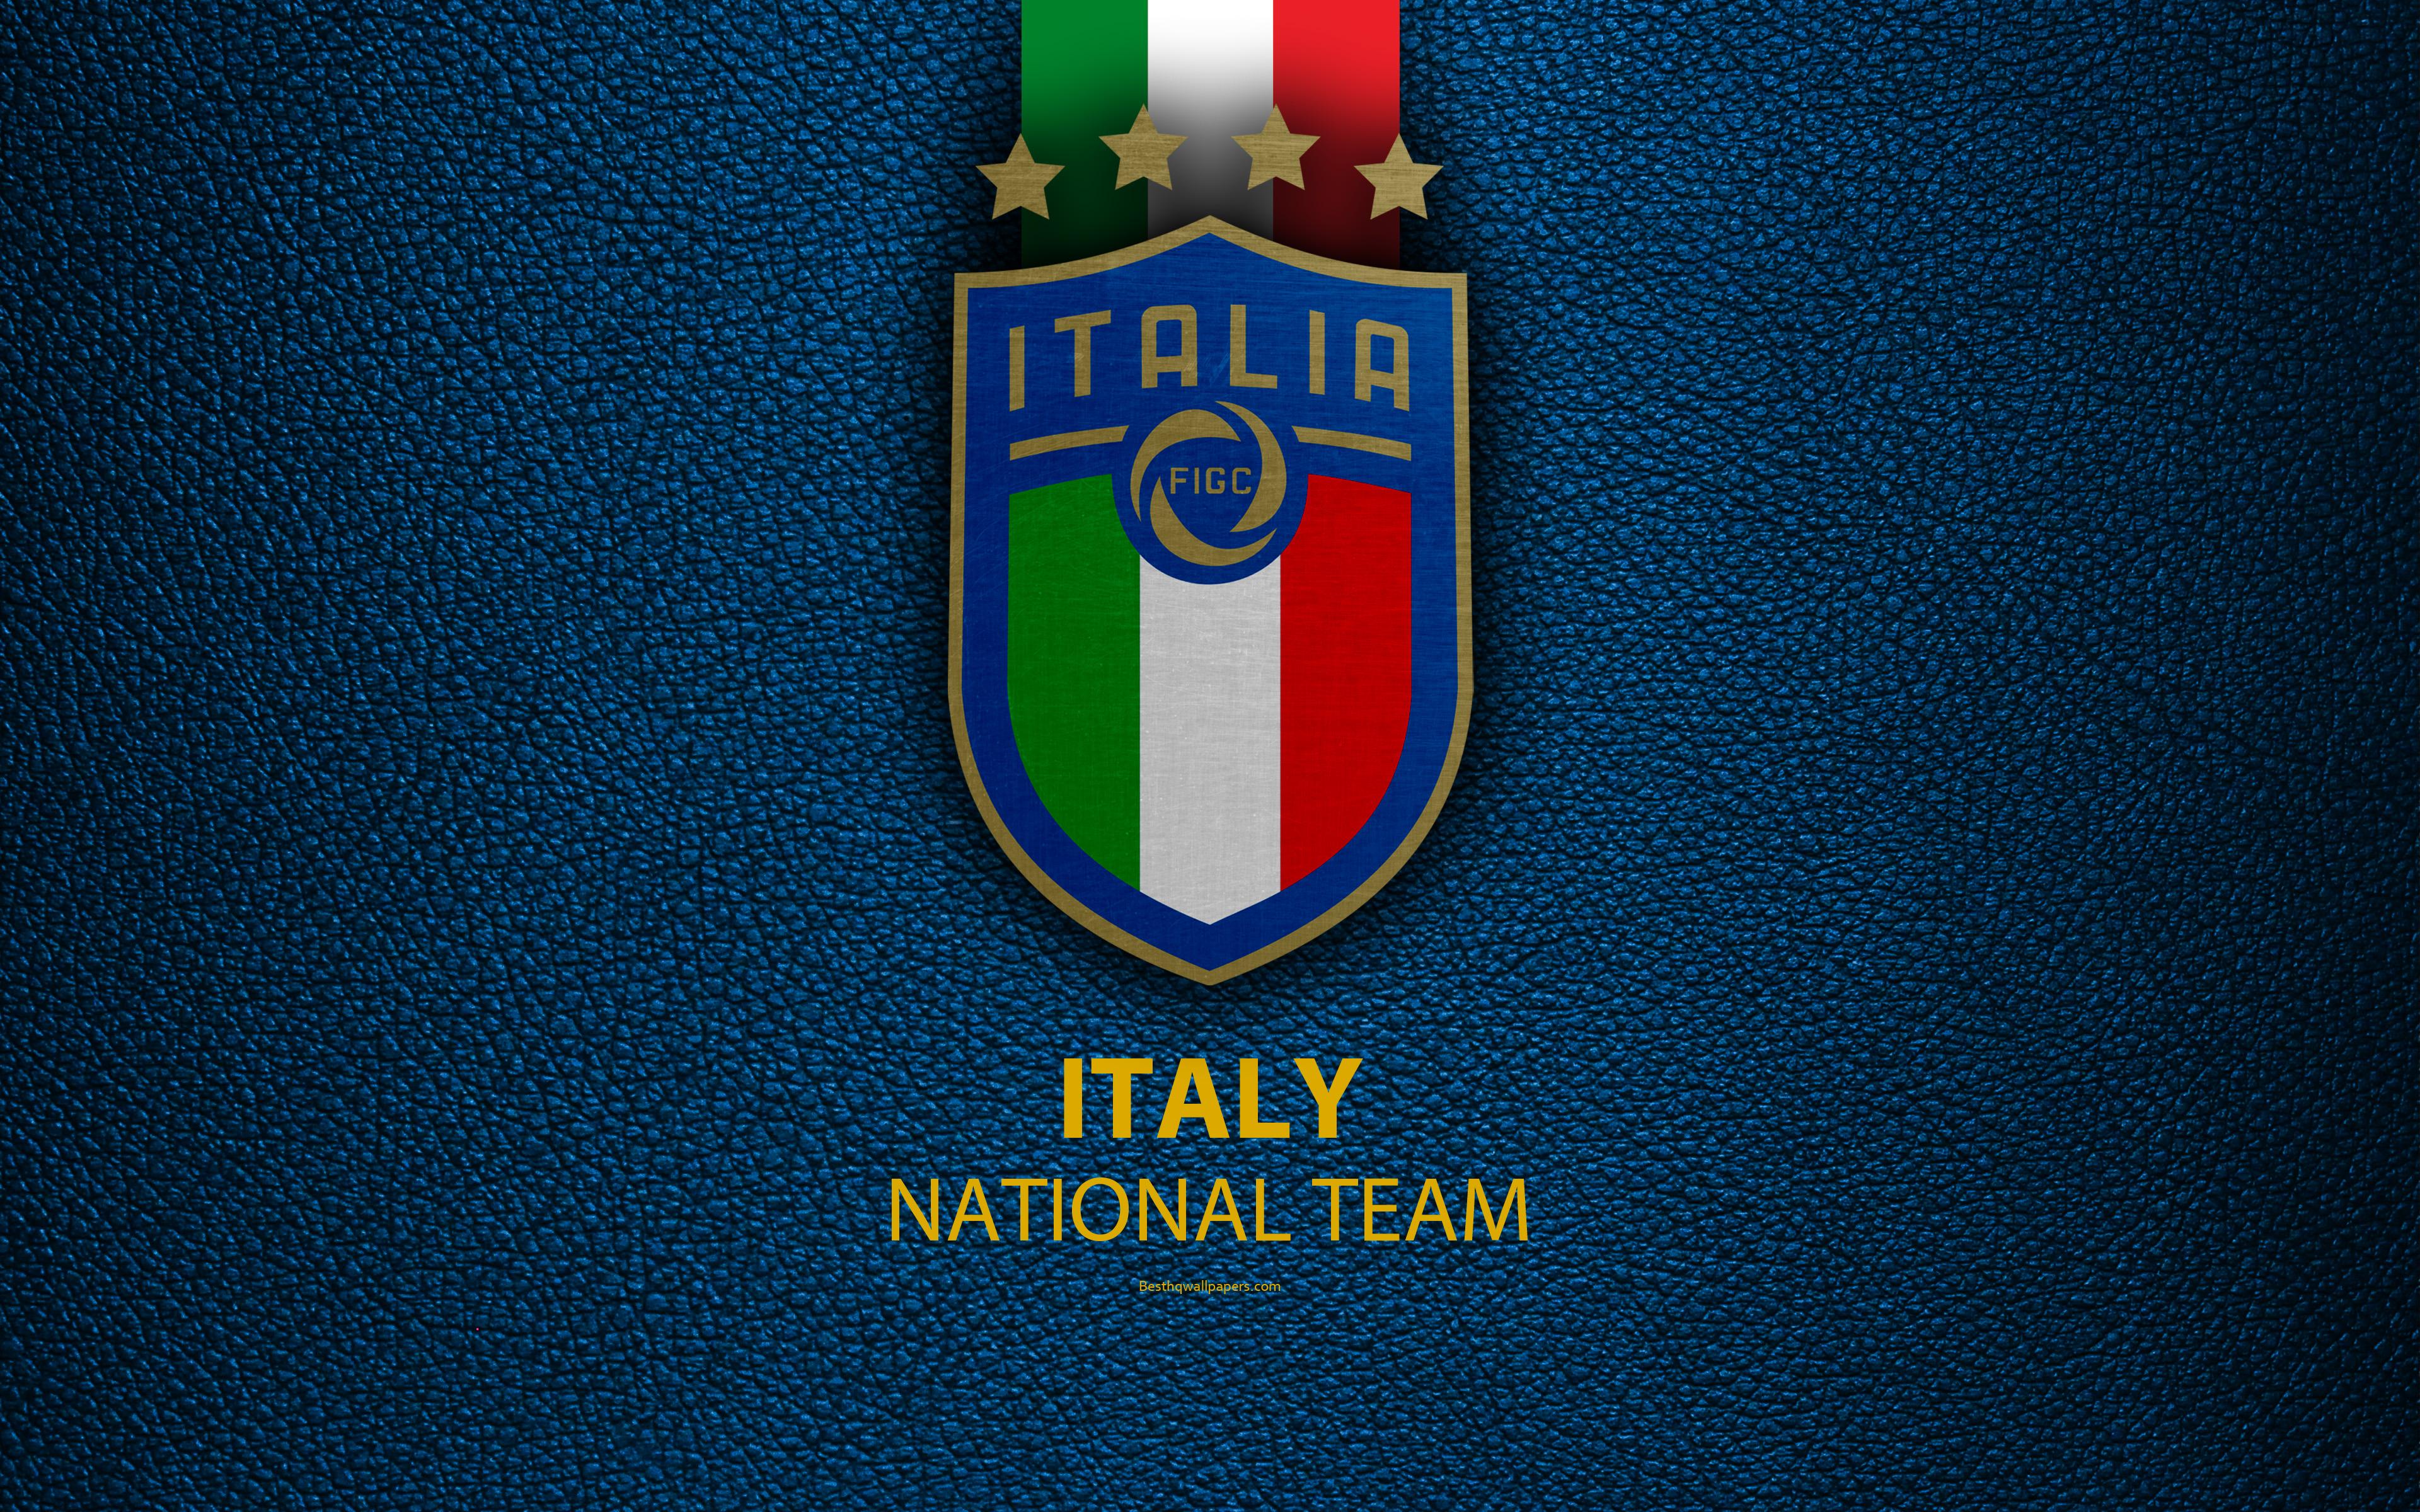 Download wallpaper Italy national football team, 4k, blue leather